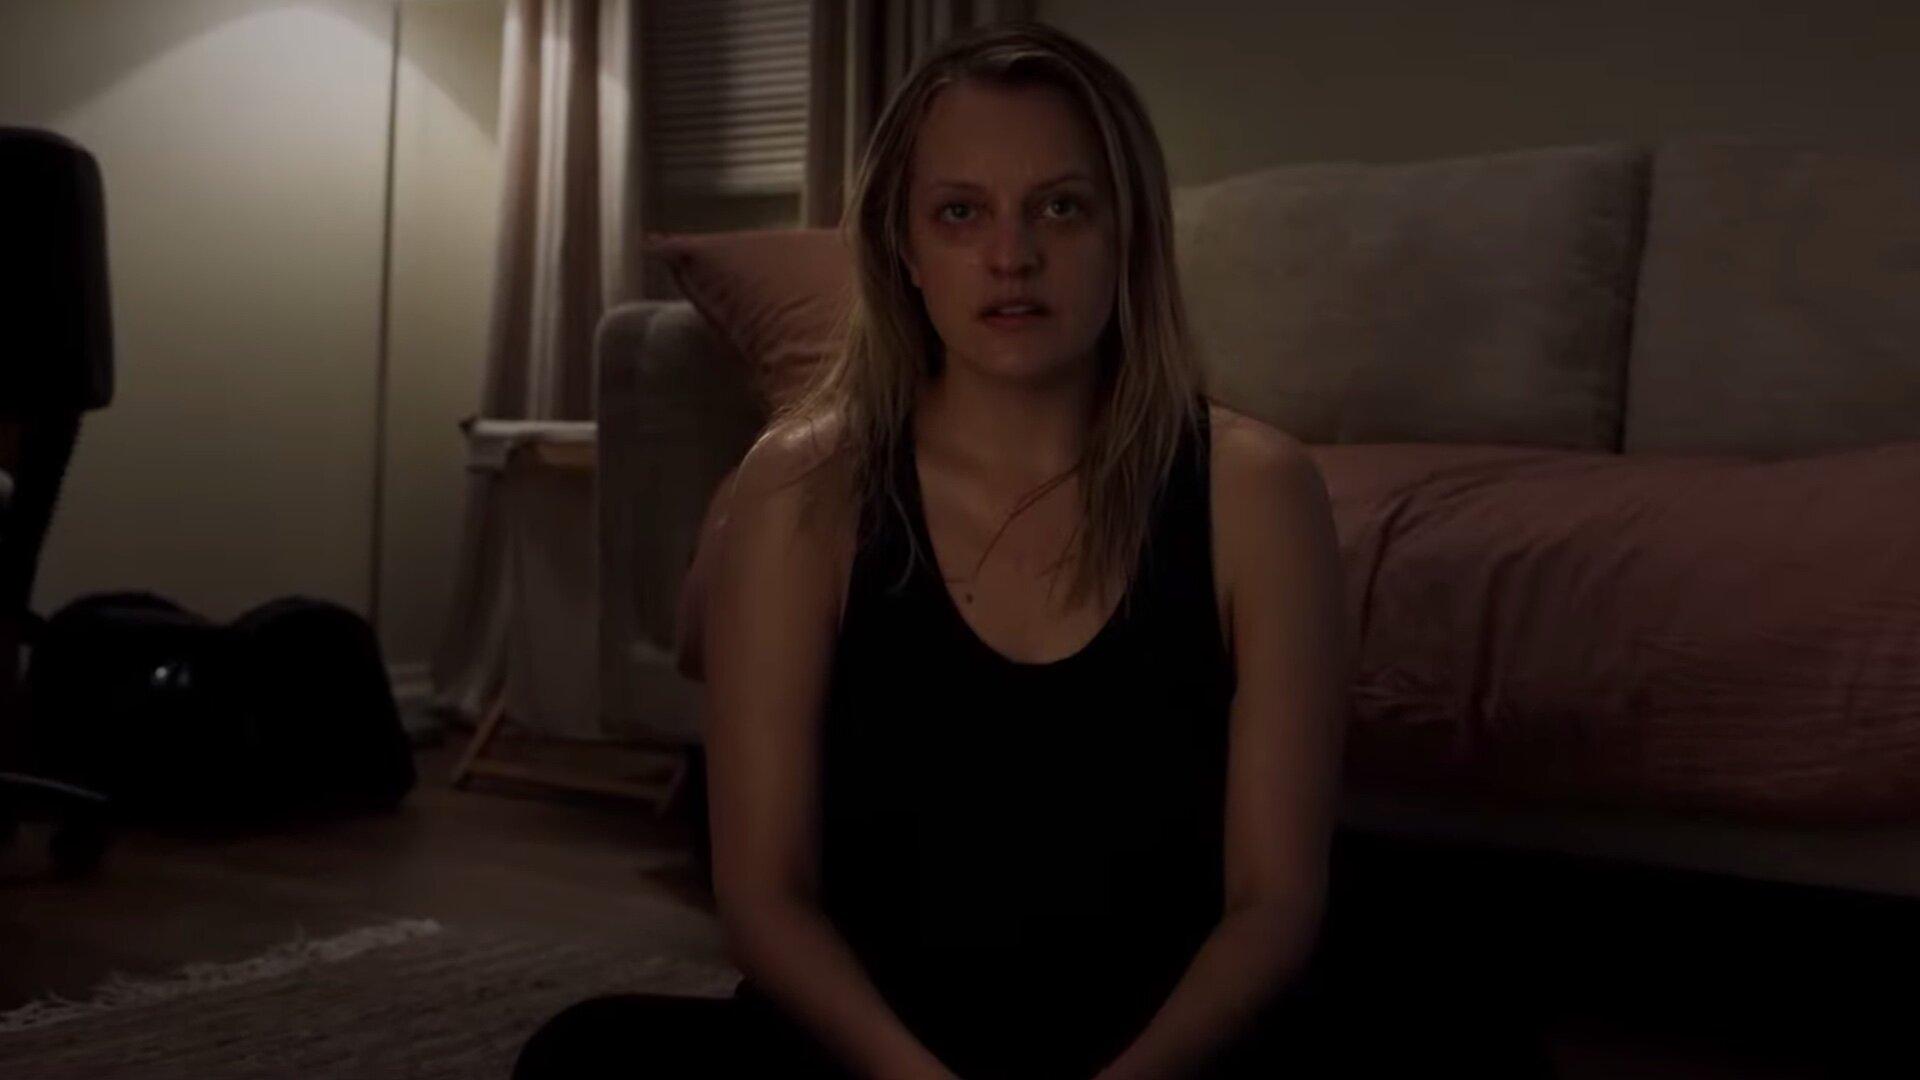 Elisabeth Moss Is Driven to Madness in This Messed Up Trailer for